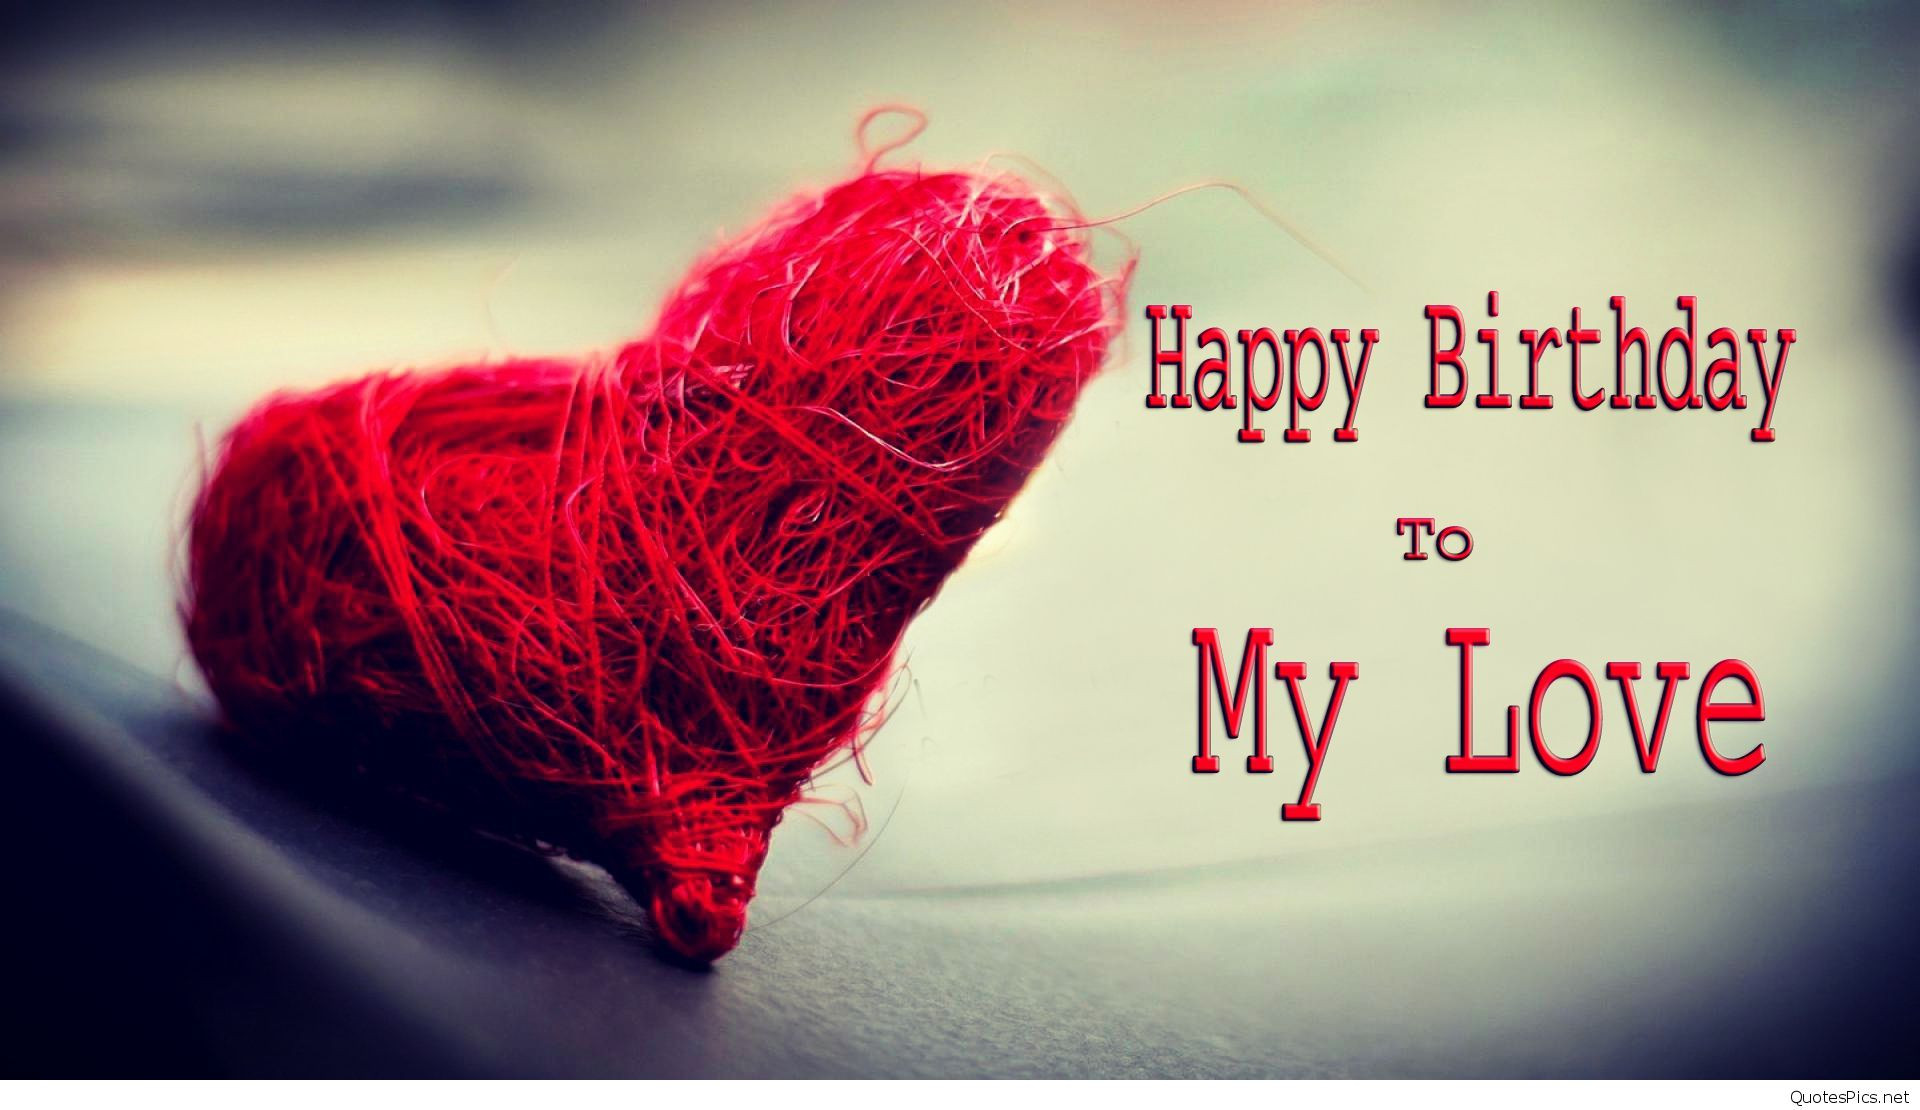 Happy Birthday Love Quotes
 Love happy birthday wishes cards sayings